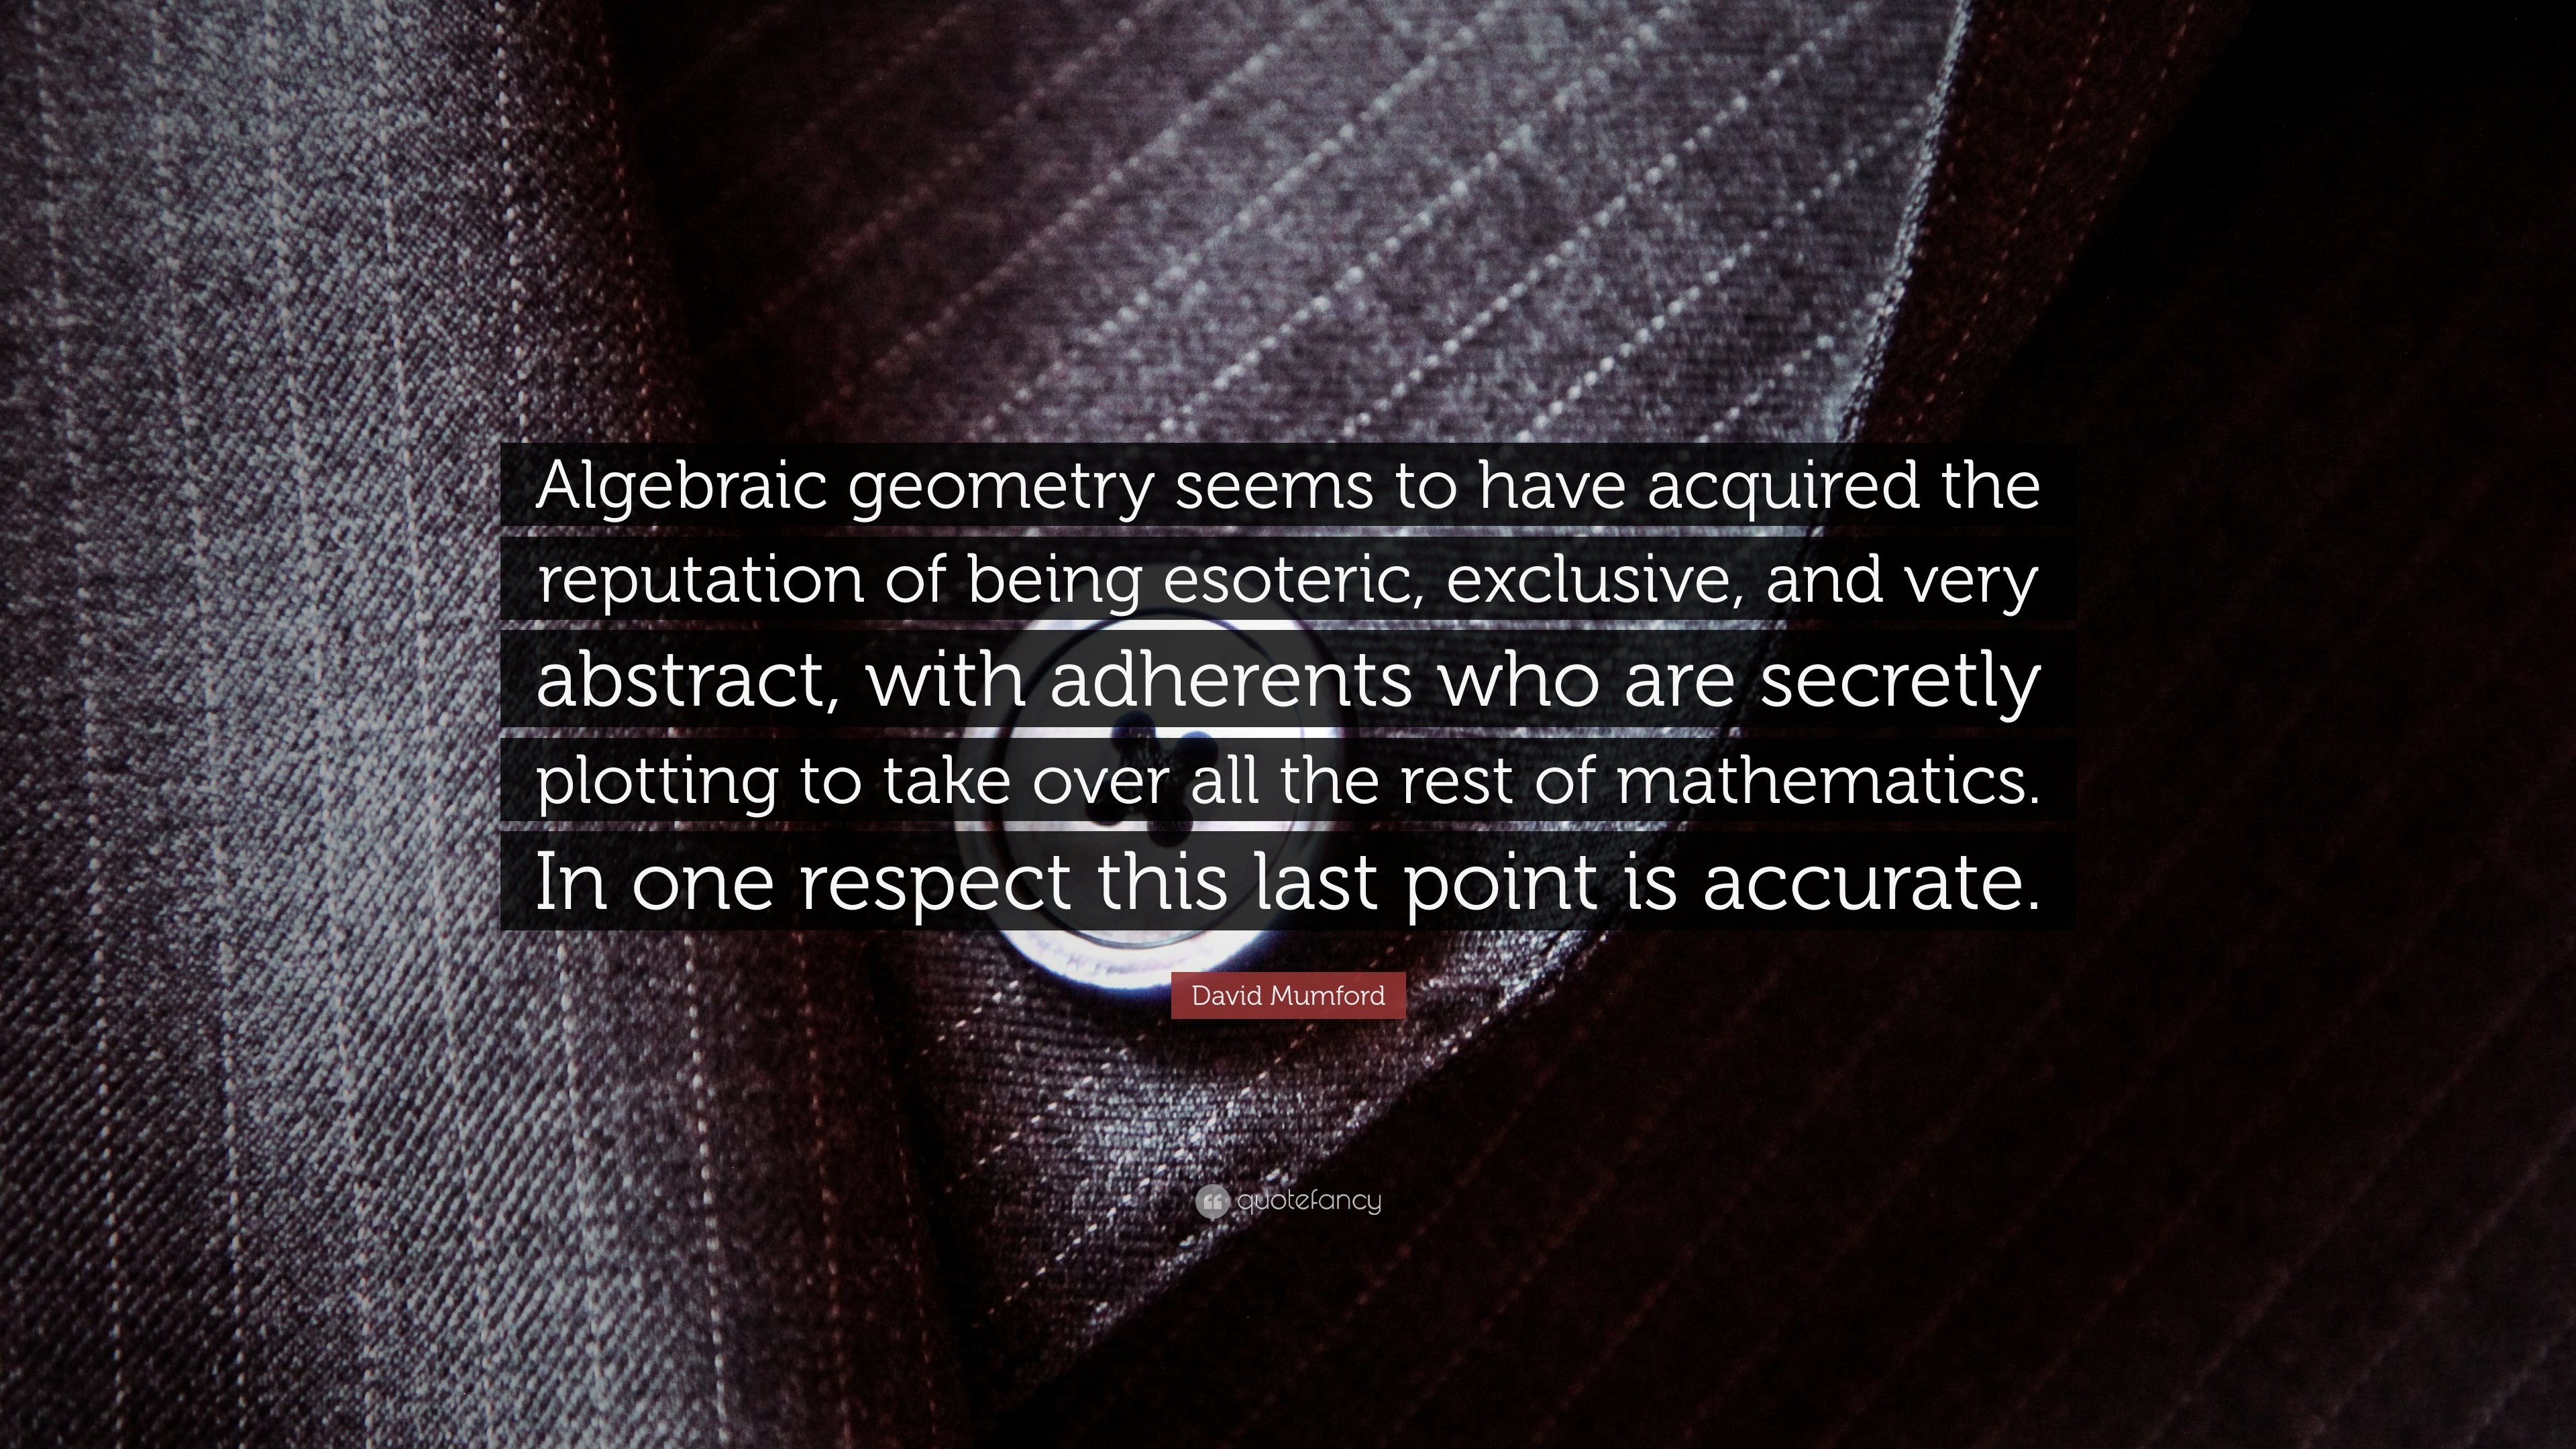 3840x2160 7 wallpapers. David Mumford Quote: “Algebraic geometry seems to have  acquired the reputation of being esoteric